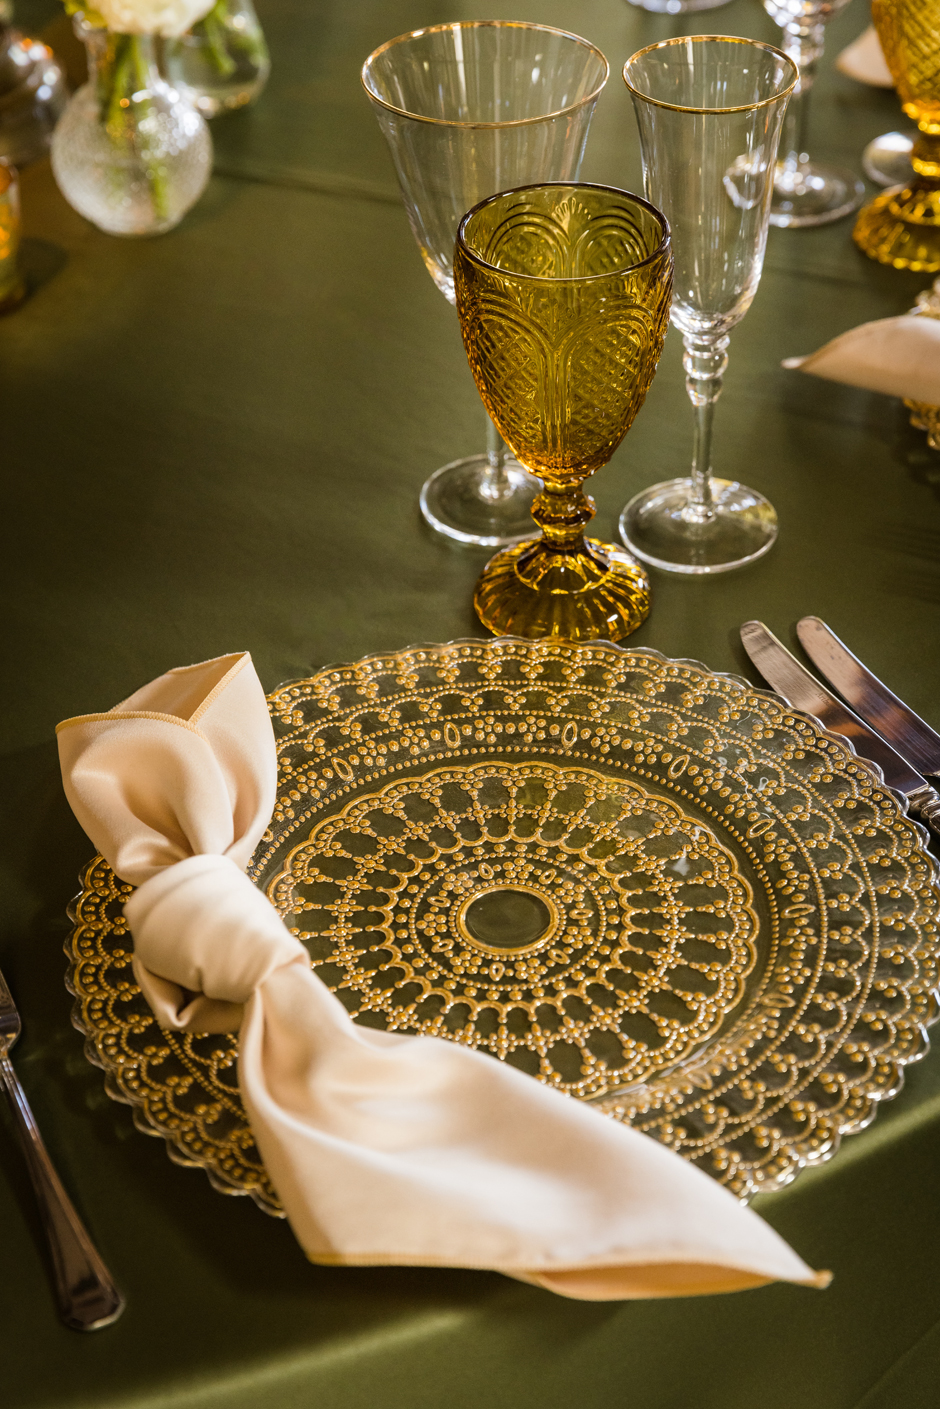 Gold Daisy charger plate with moss Verona linen, nude Verona napkin, gold trim glasses & amber goblet